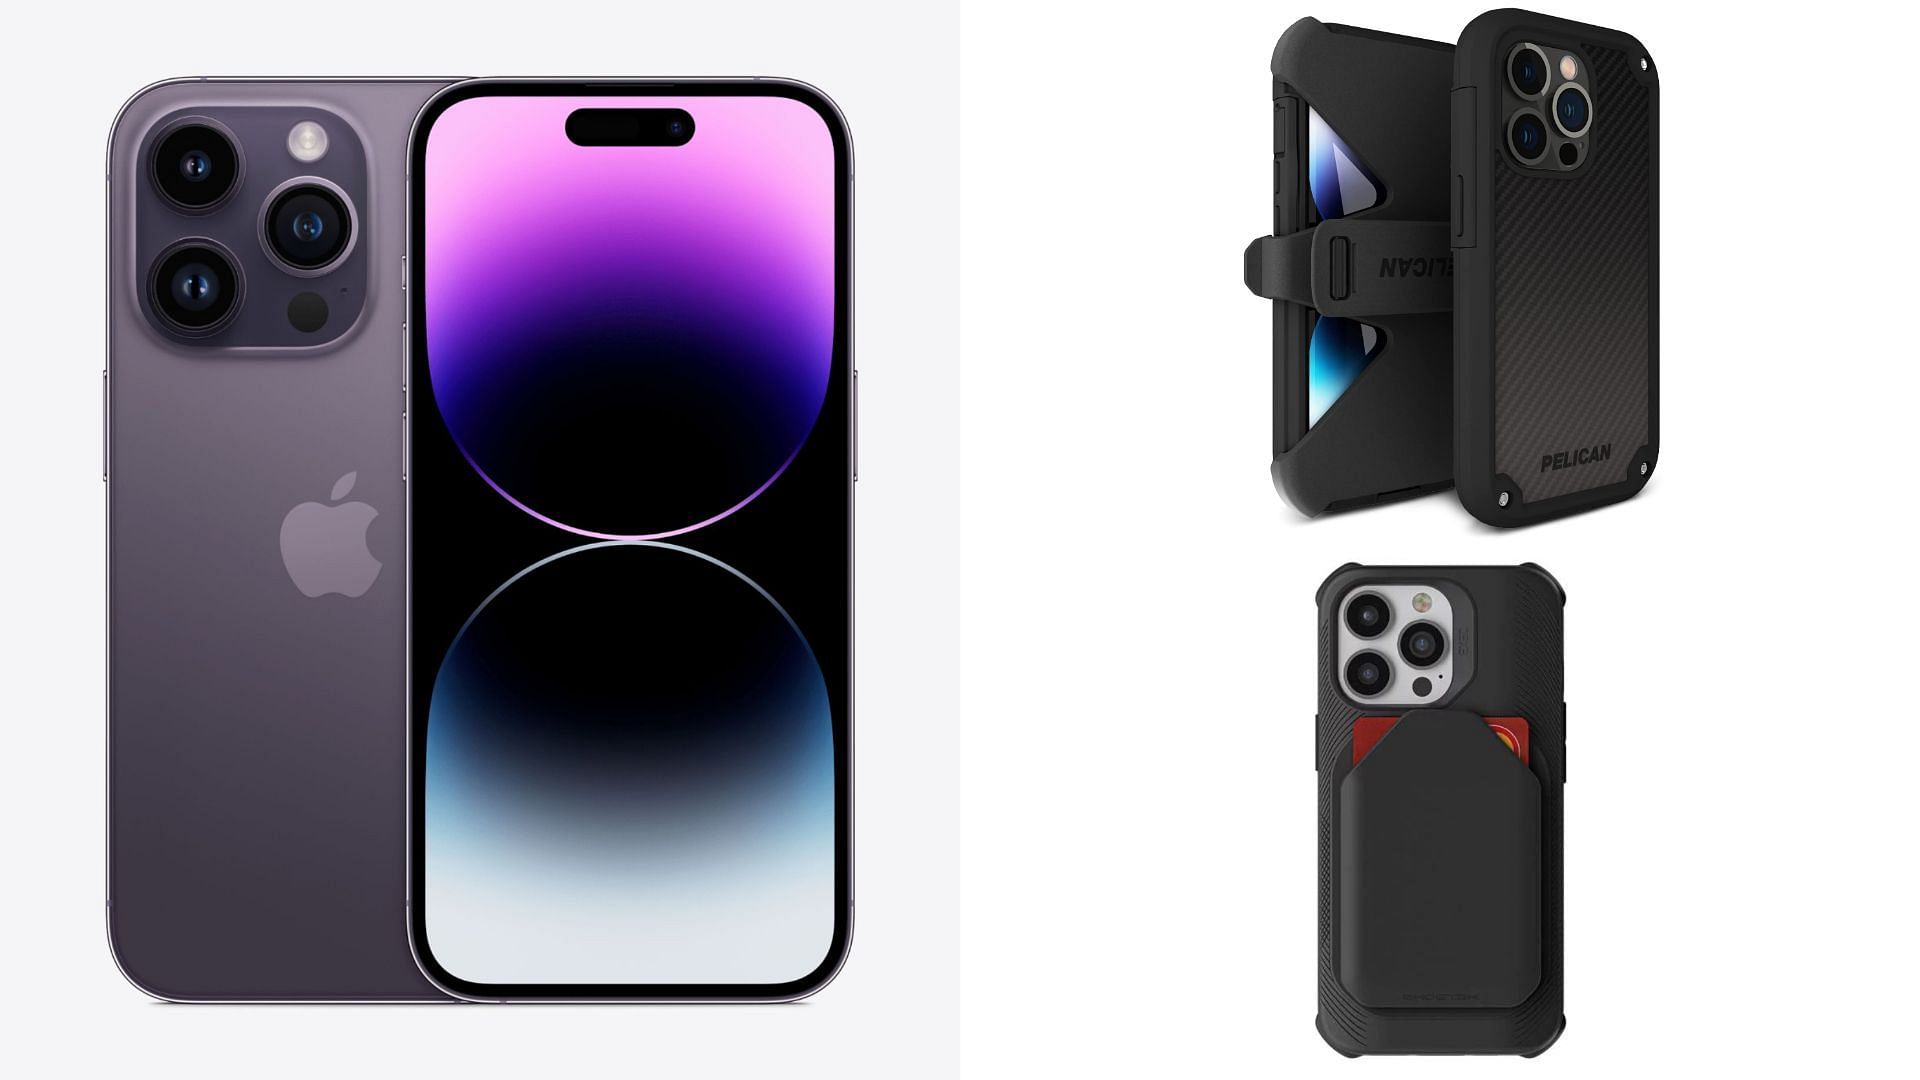 Five best cases for iPhone 14 Pro (Image by Apple, Pelican and Ghostek)